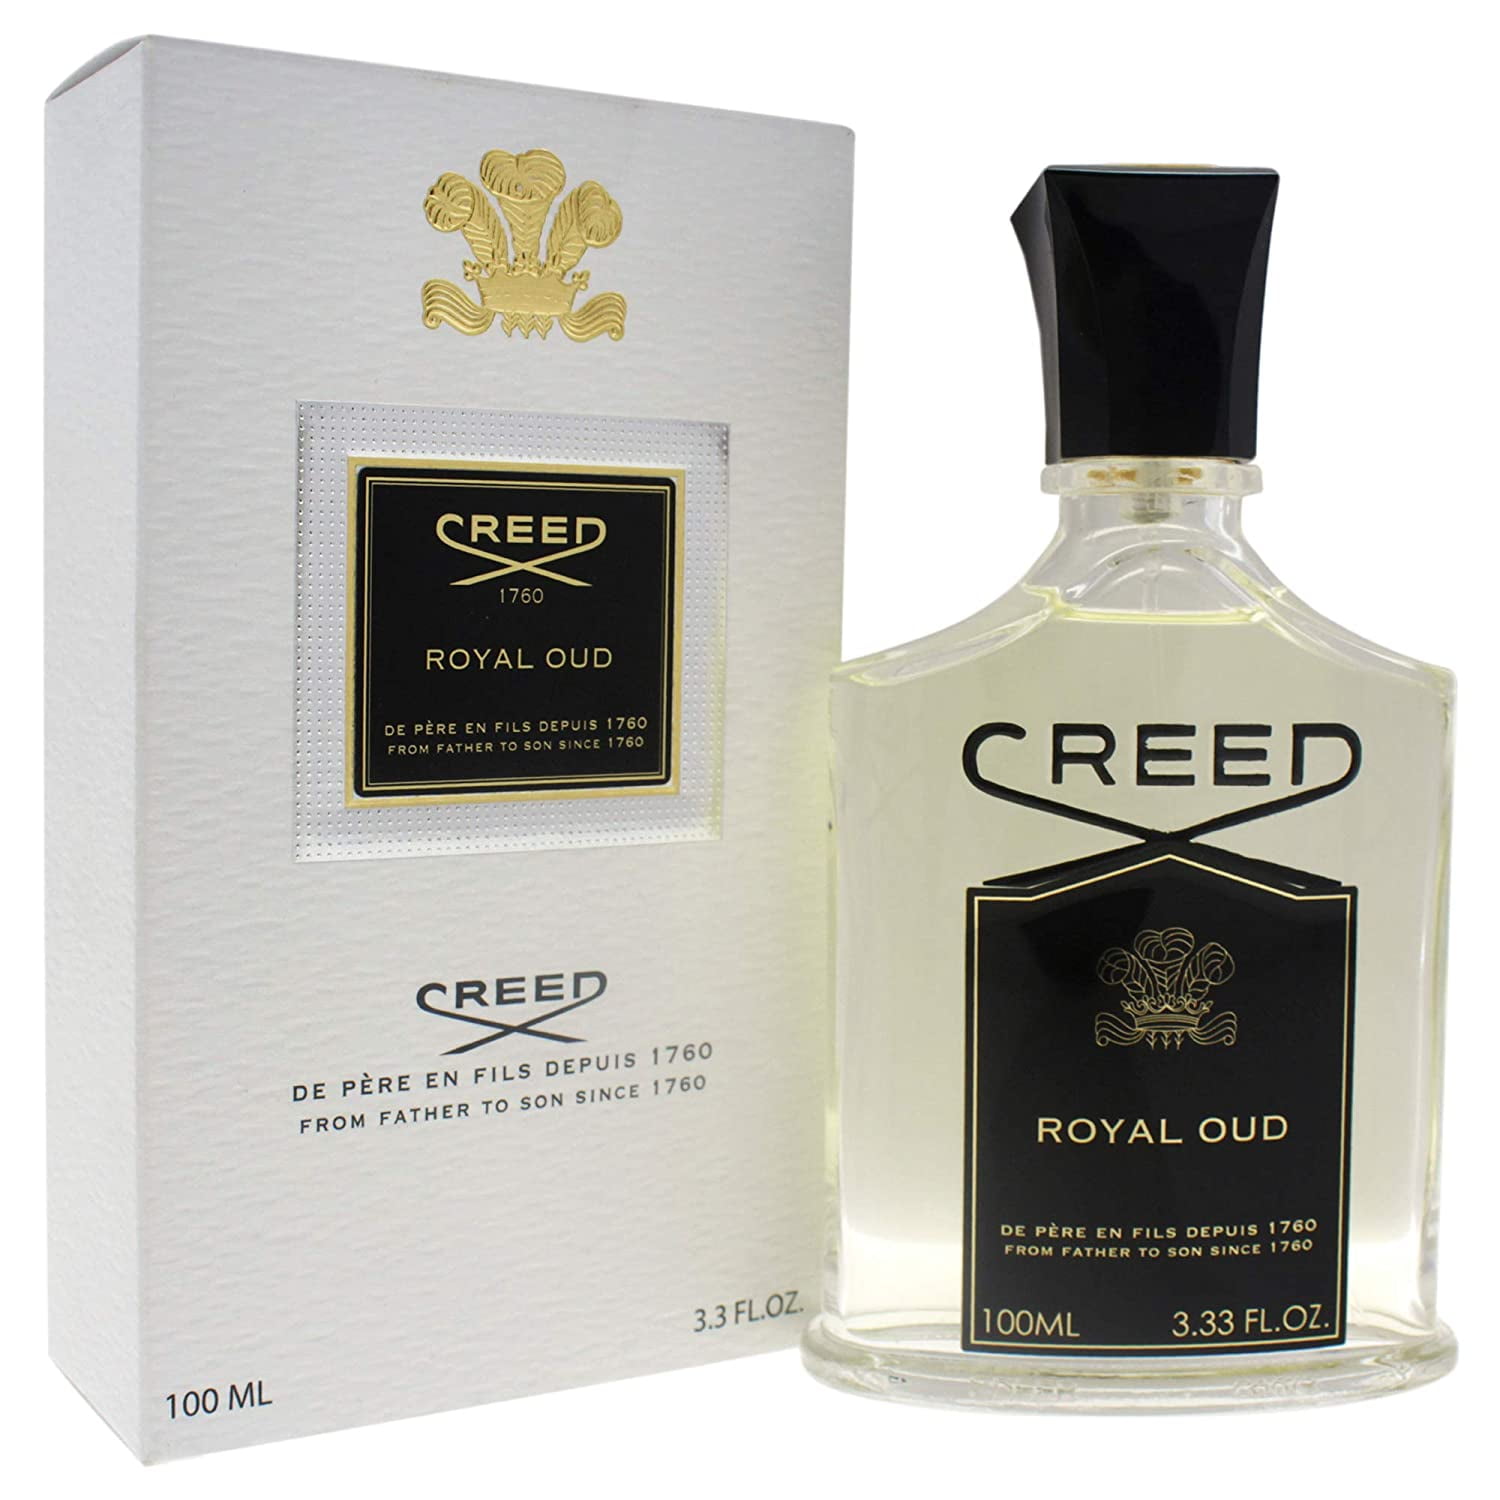 Creed perfume for men